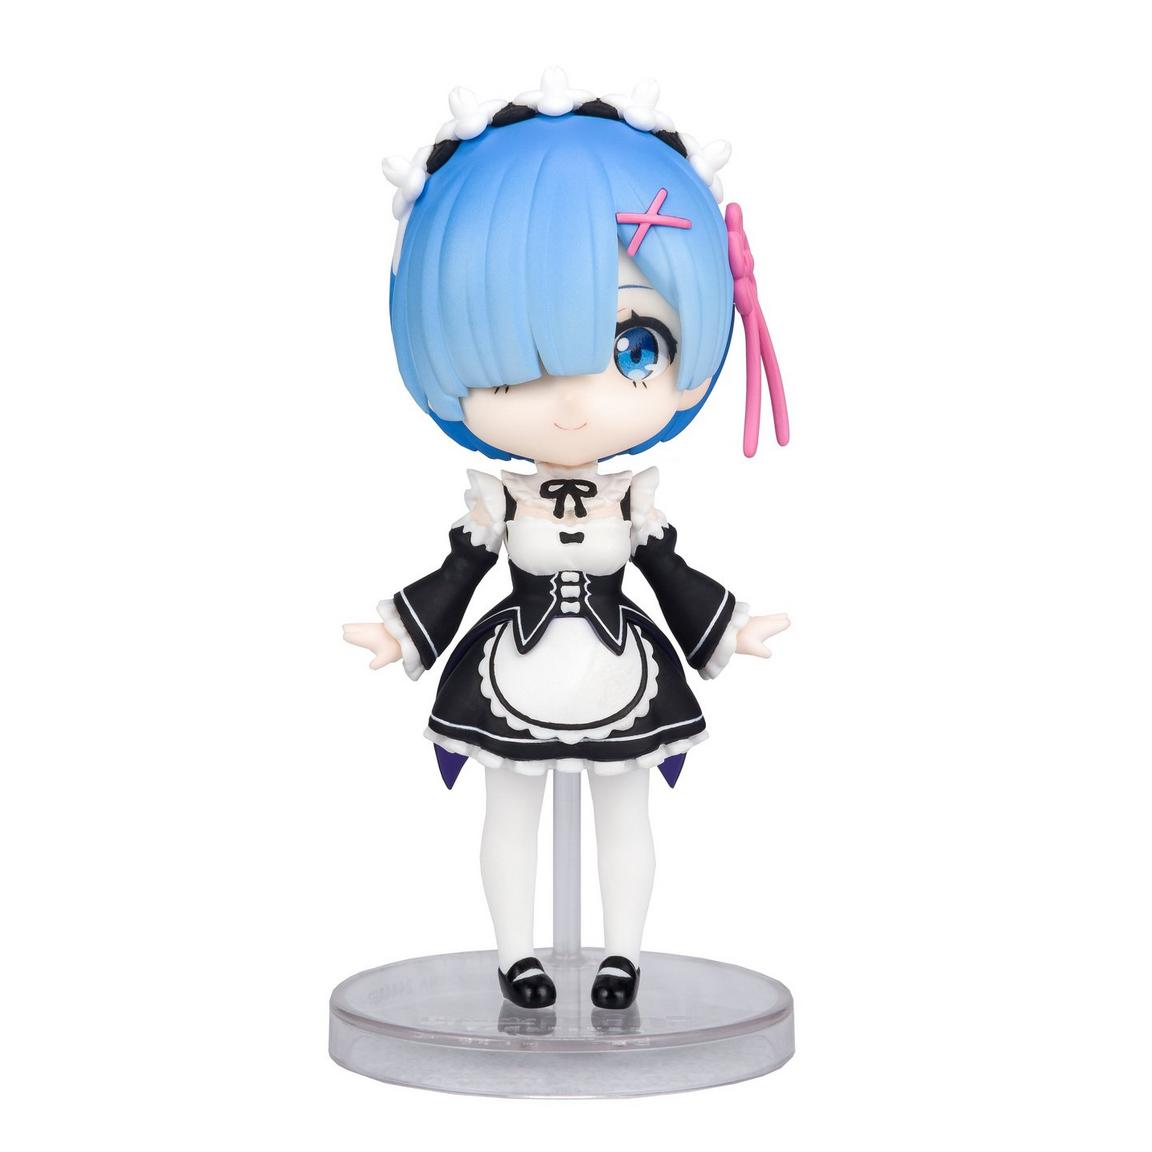 Bandai Figuarts mini Re:Zero -Starting Life in Another World - Rem